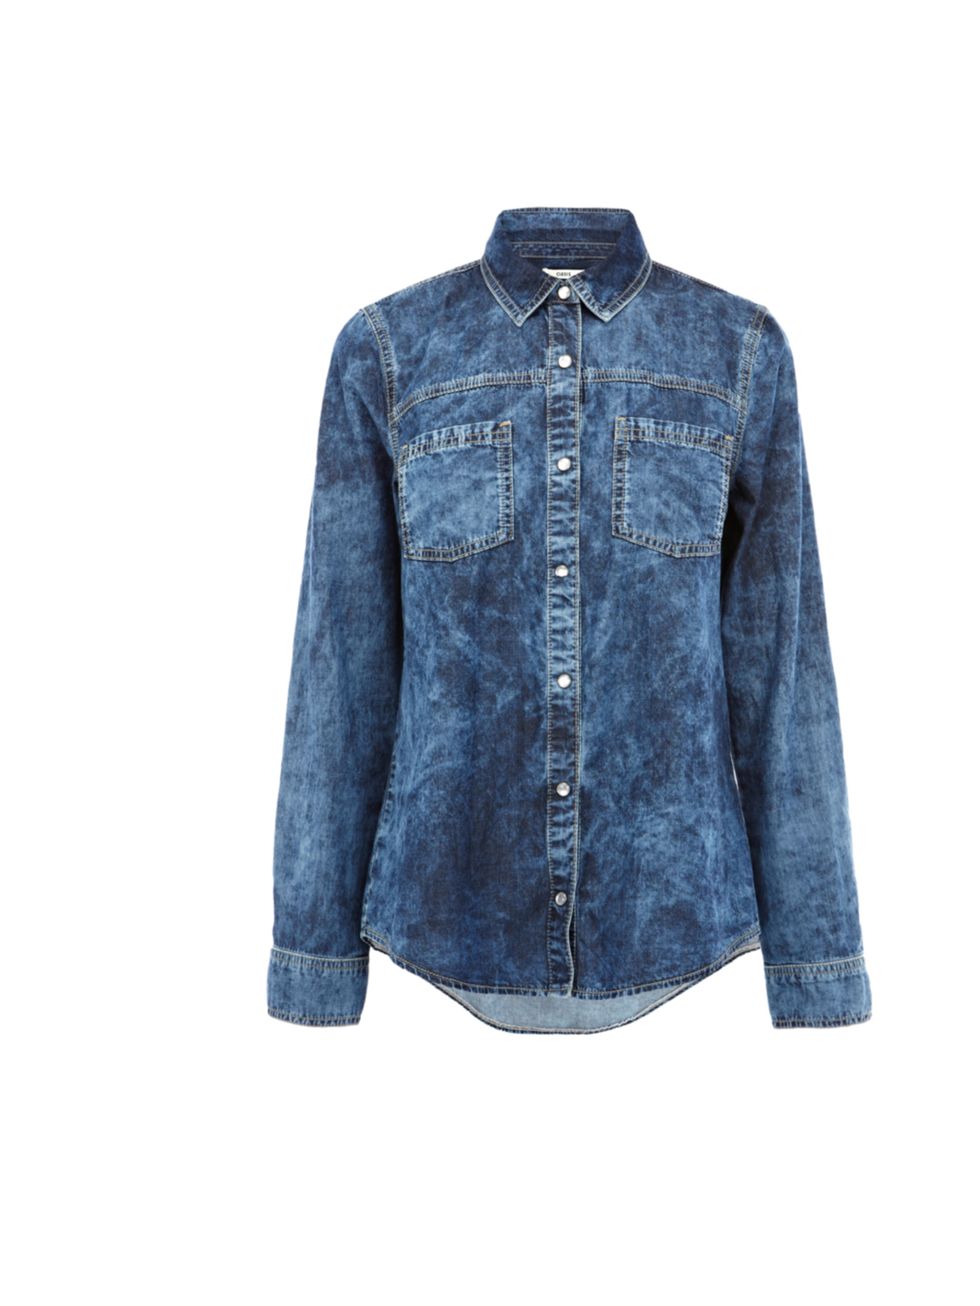 <p>Perfect for layering with leather trousers or under your new chunky knitwear, this denim shirt will instantly add edge to your autumn wardrobe <a href="http://www.oasis-stores.com/?lng=en&amp;ctry=GB&amp;">Oasis</a> denim shirt, £38</p>